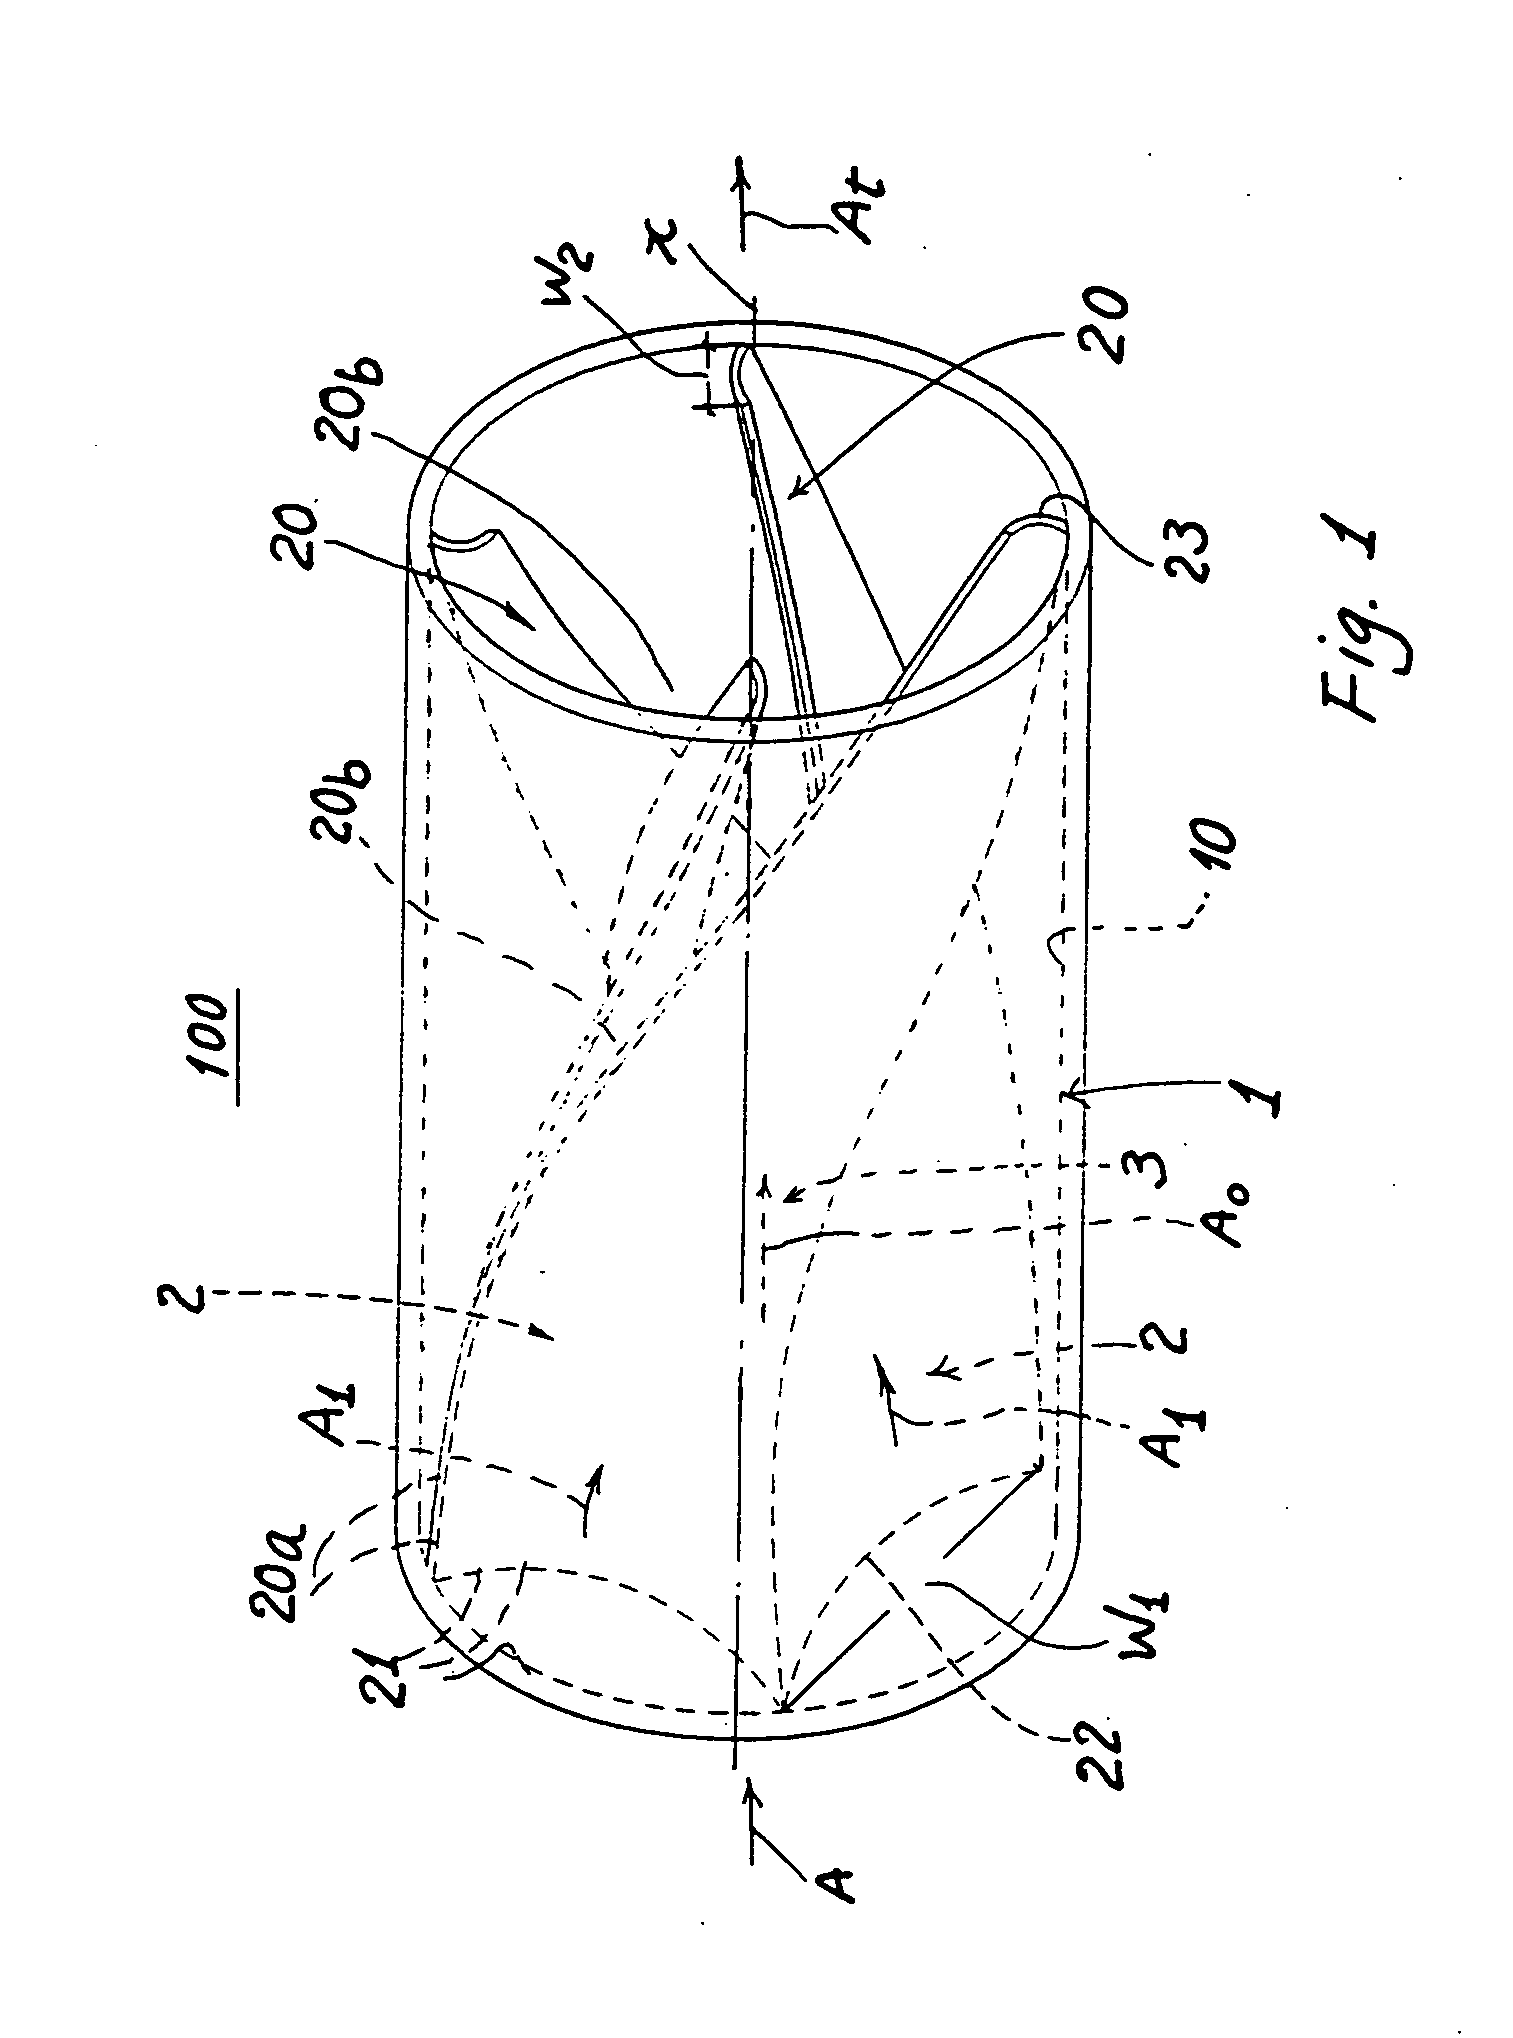 Air swirling device